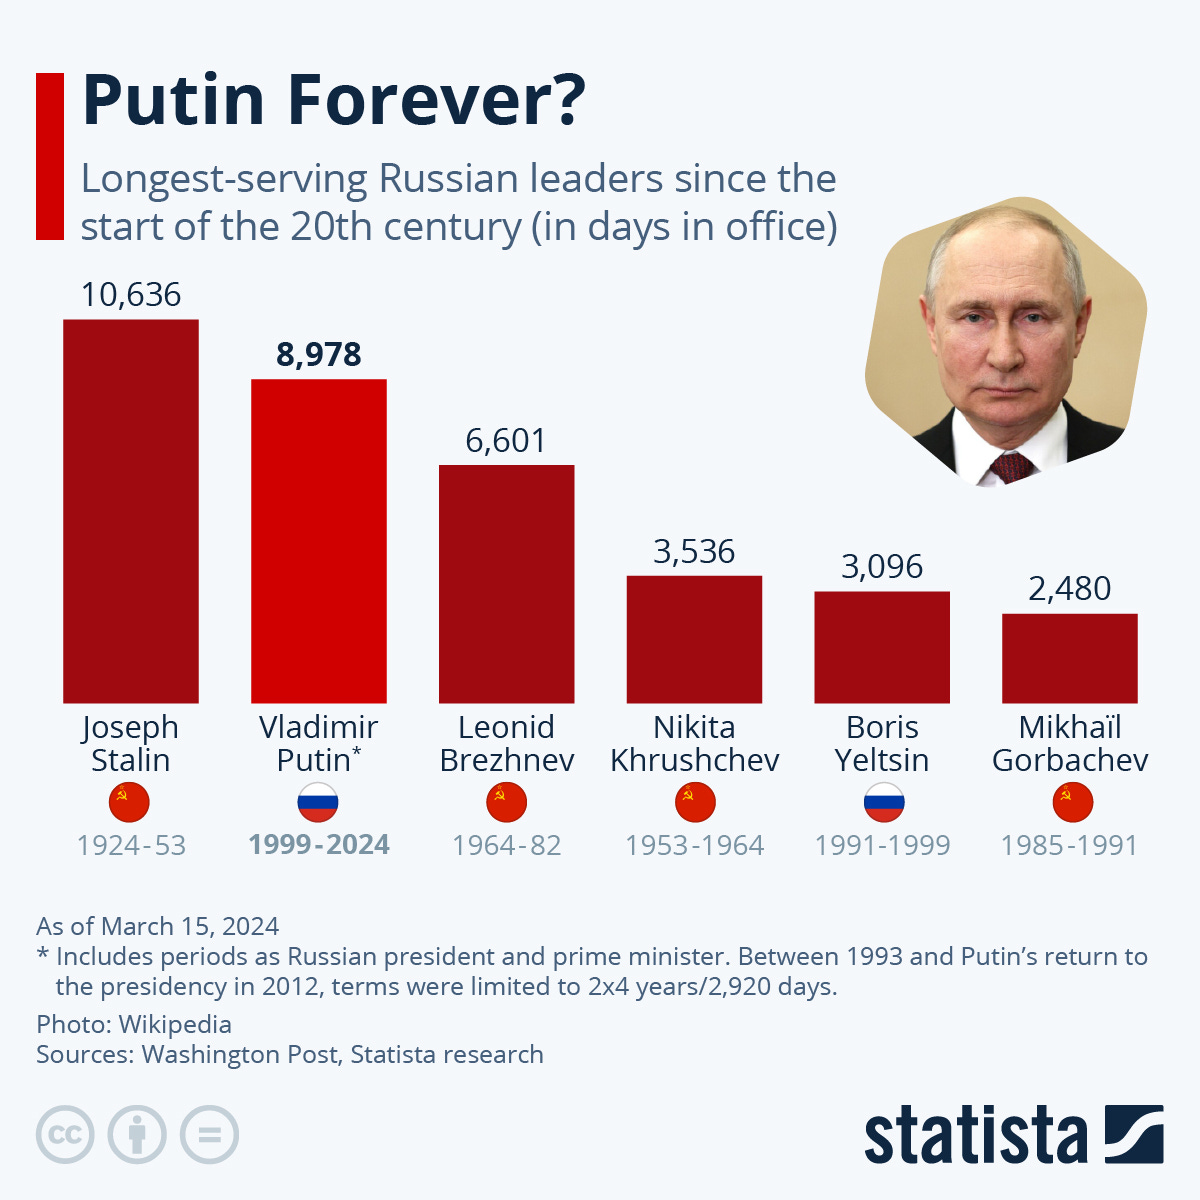 Longest serving Russian leaders since the start of the 20th century (in days in office): Joseph Stalin (1924-1953), 10,636; Vladimir Putin* (1999-2024), 8,978; Leonid Brezhnev (1964-1982), 6,601; Nikita Khrushchev (1953-1964), 3,536; Boris Yeltsin (1991-1999), 3,096; Michaïl Gorbachev (1985-1991), 2,480). *Includes periods as Russian president and prime minister. Between 1993 and Putin's return to the presidency in 2012, terms were limited to 2x4 years/2,920 days. Sources: Washington Post, Statista research.